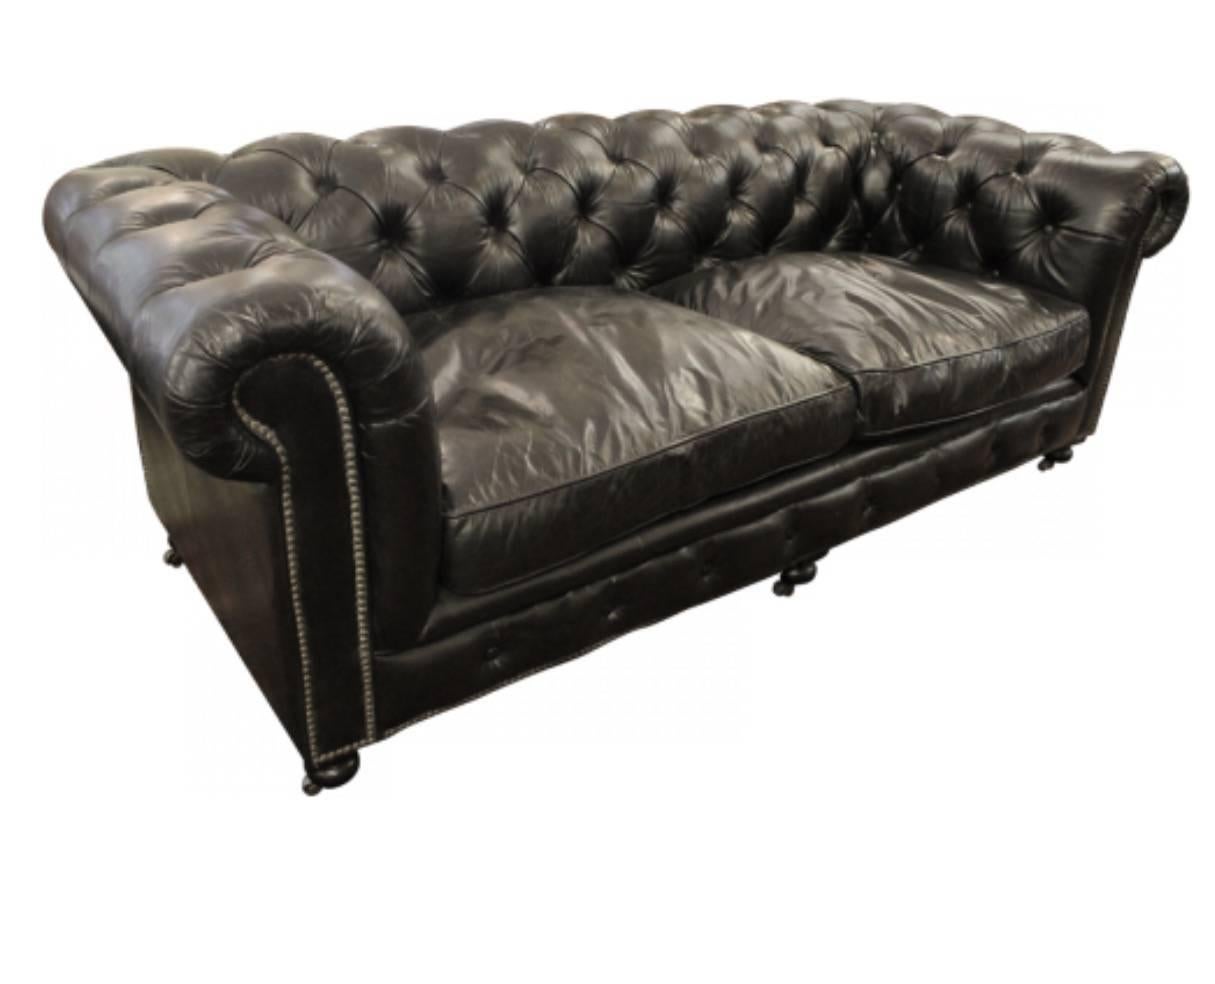 20th Century Large Ralph Lauren Black Leather Tufted Cigar Couch